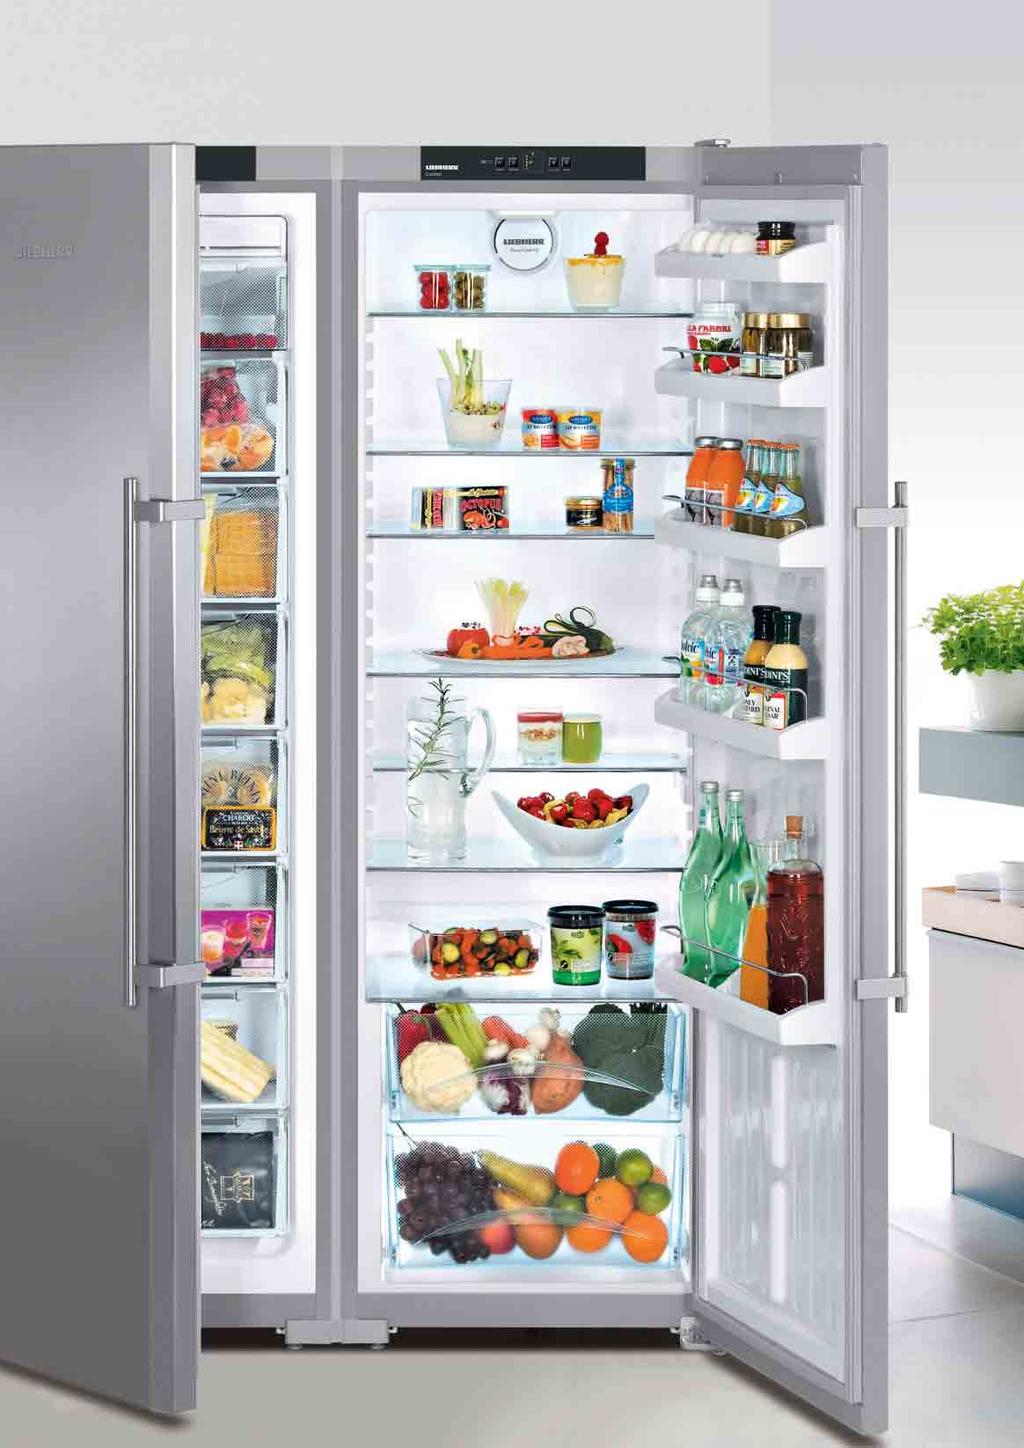 Side-by-Side fridge-freezer with two temperature zones: SBSesf 71 With the eight drawer NoFrost freezer compartment, the Side-by-Side fridge-freezer SBSesf 71 gives you an extra-large capacity for